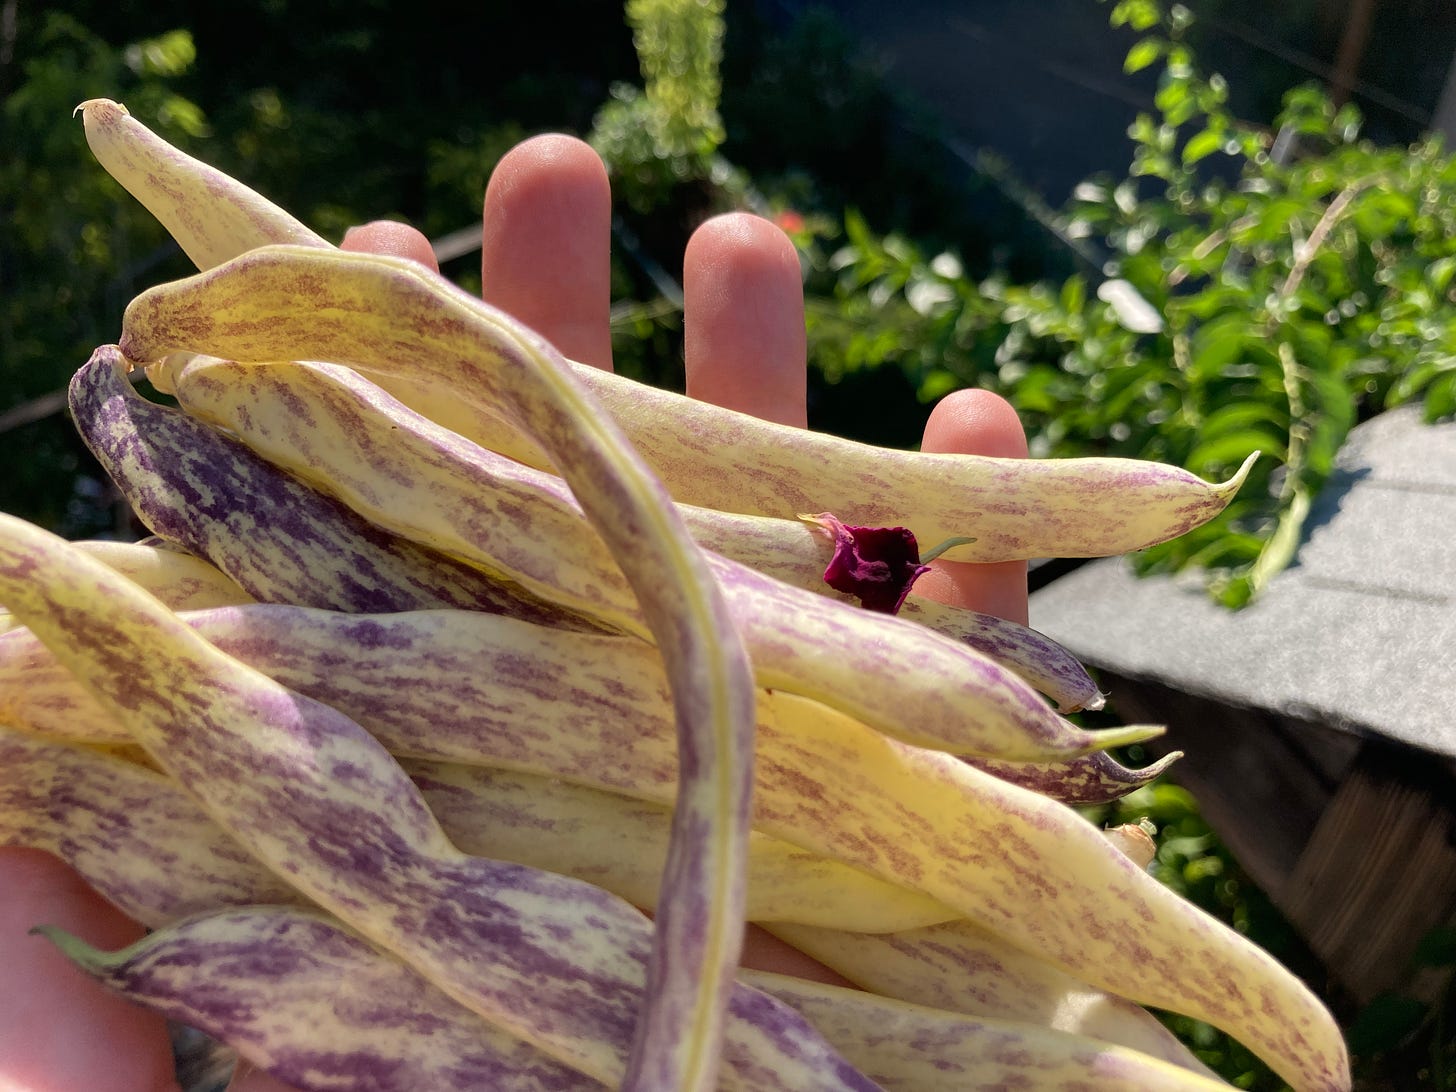 A white hand holds a several long, flat beans. They a whitish-yellow with purple brushed on them.